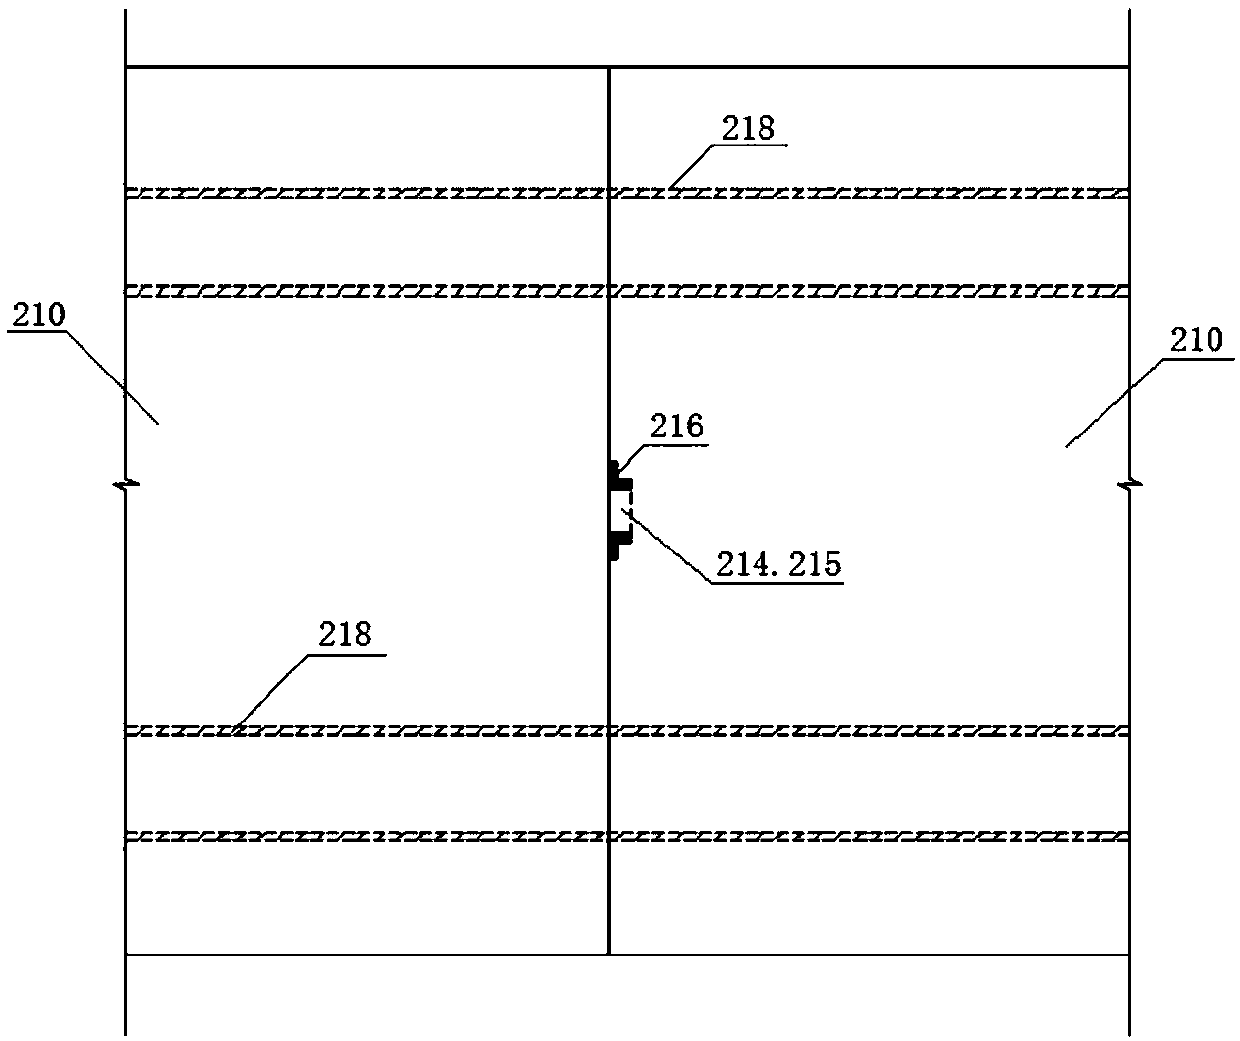 Fabricated two-stage retaining wall structure